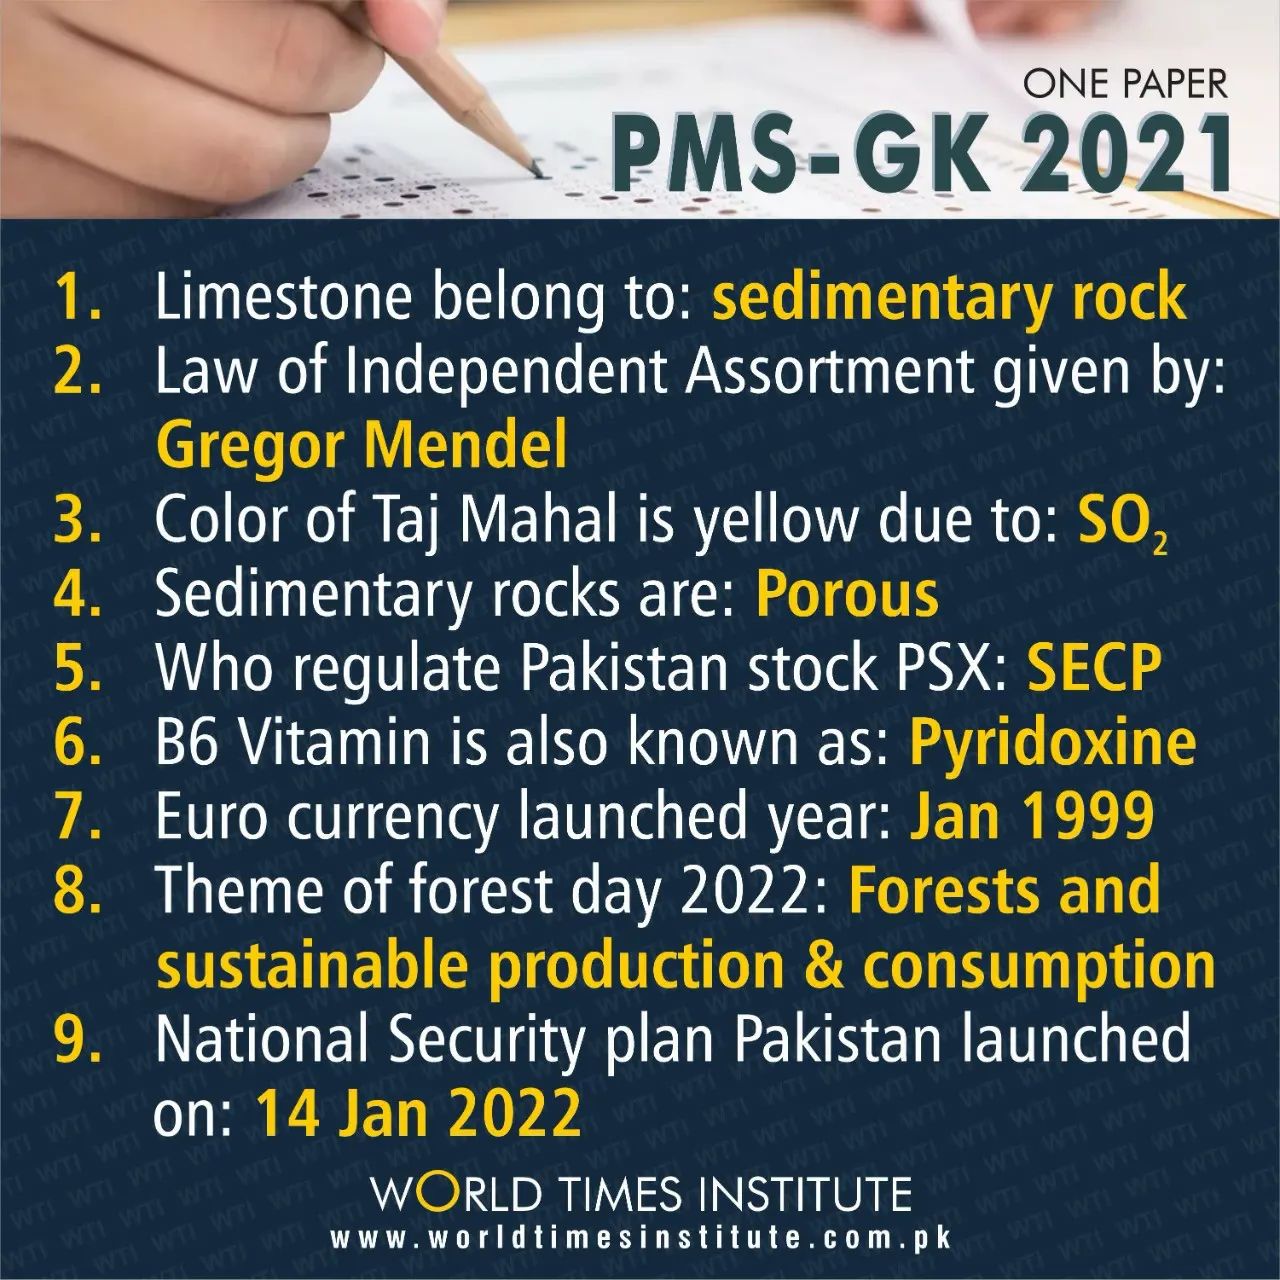 You are currently viewing ONE PAPER PMS-GK 2021 29-07-2022